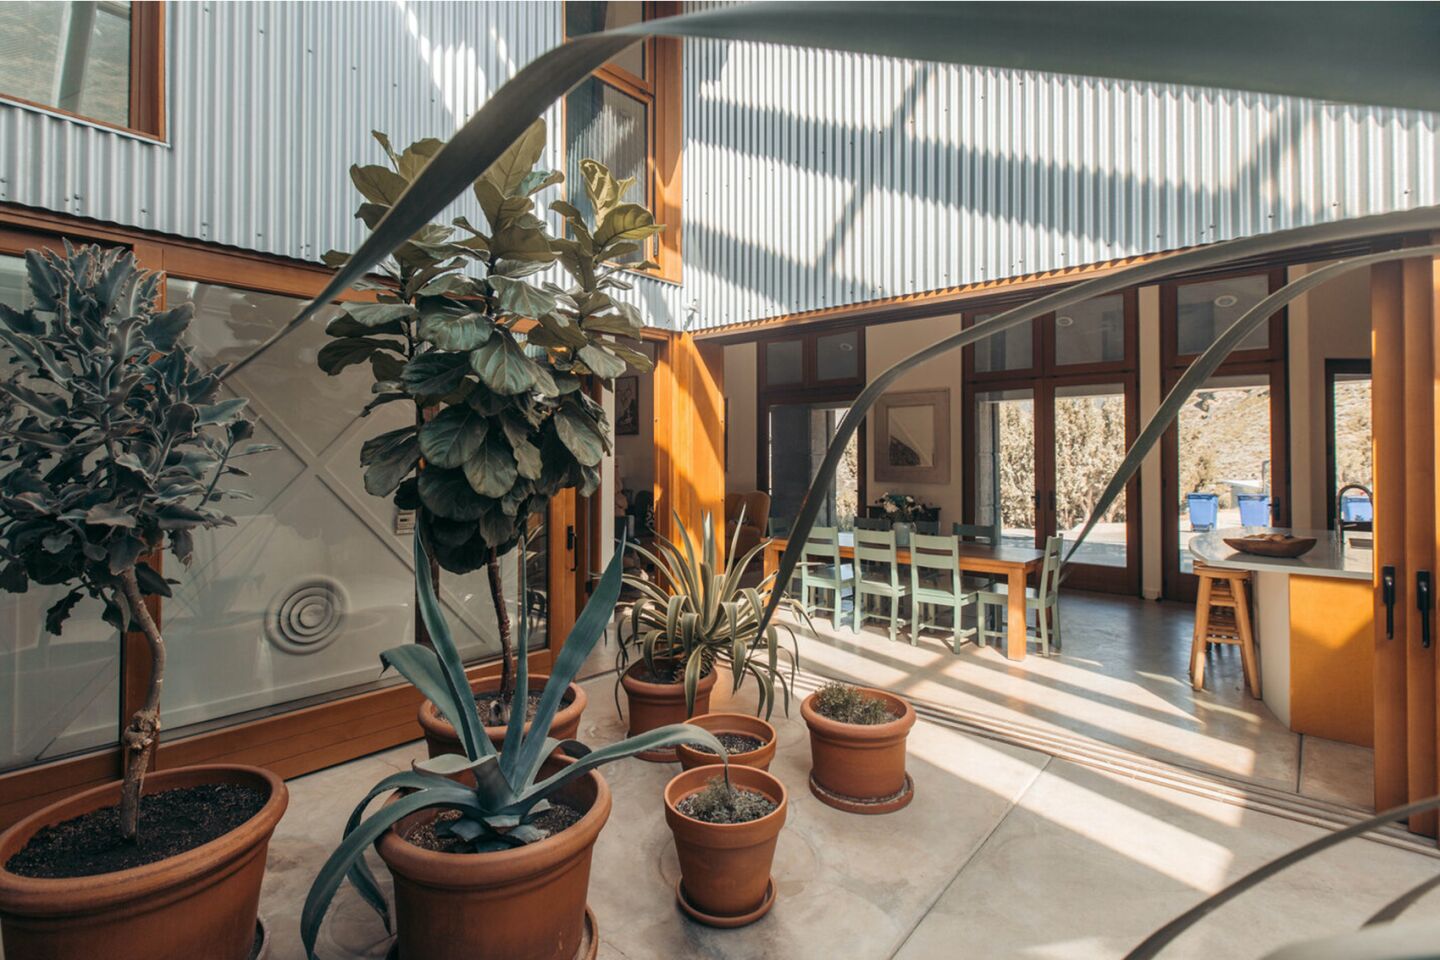 Potted trees and other houseplants in an atrium with corrugated steel and an opening to a kitchen area.